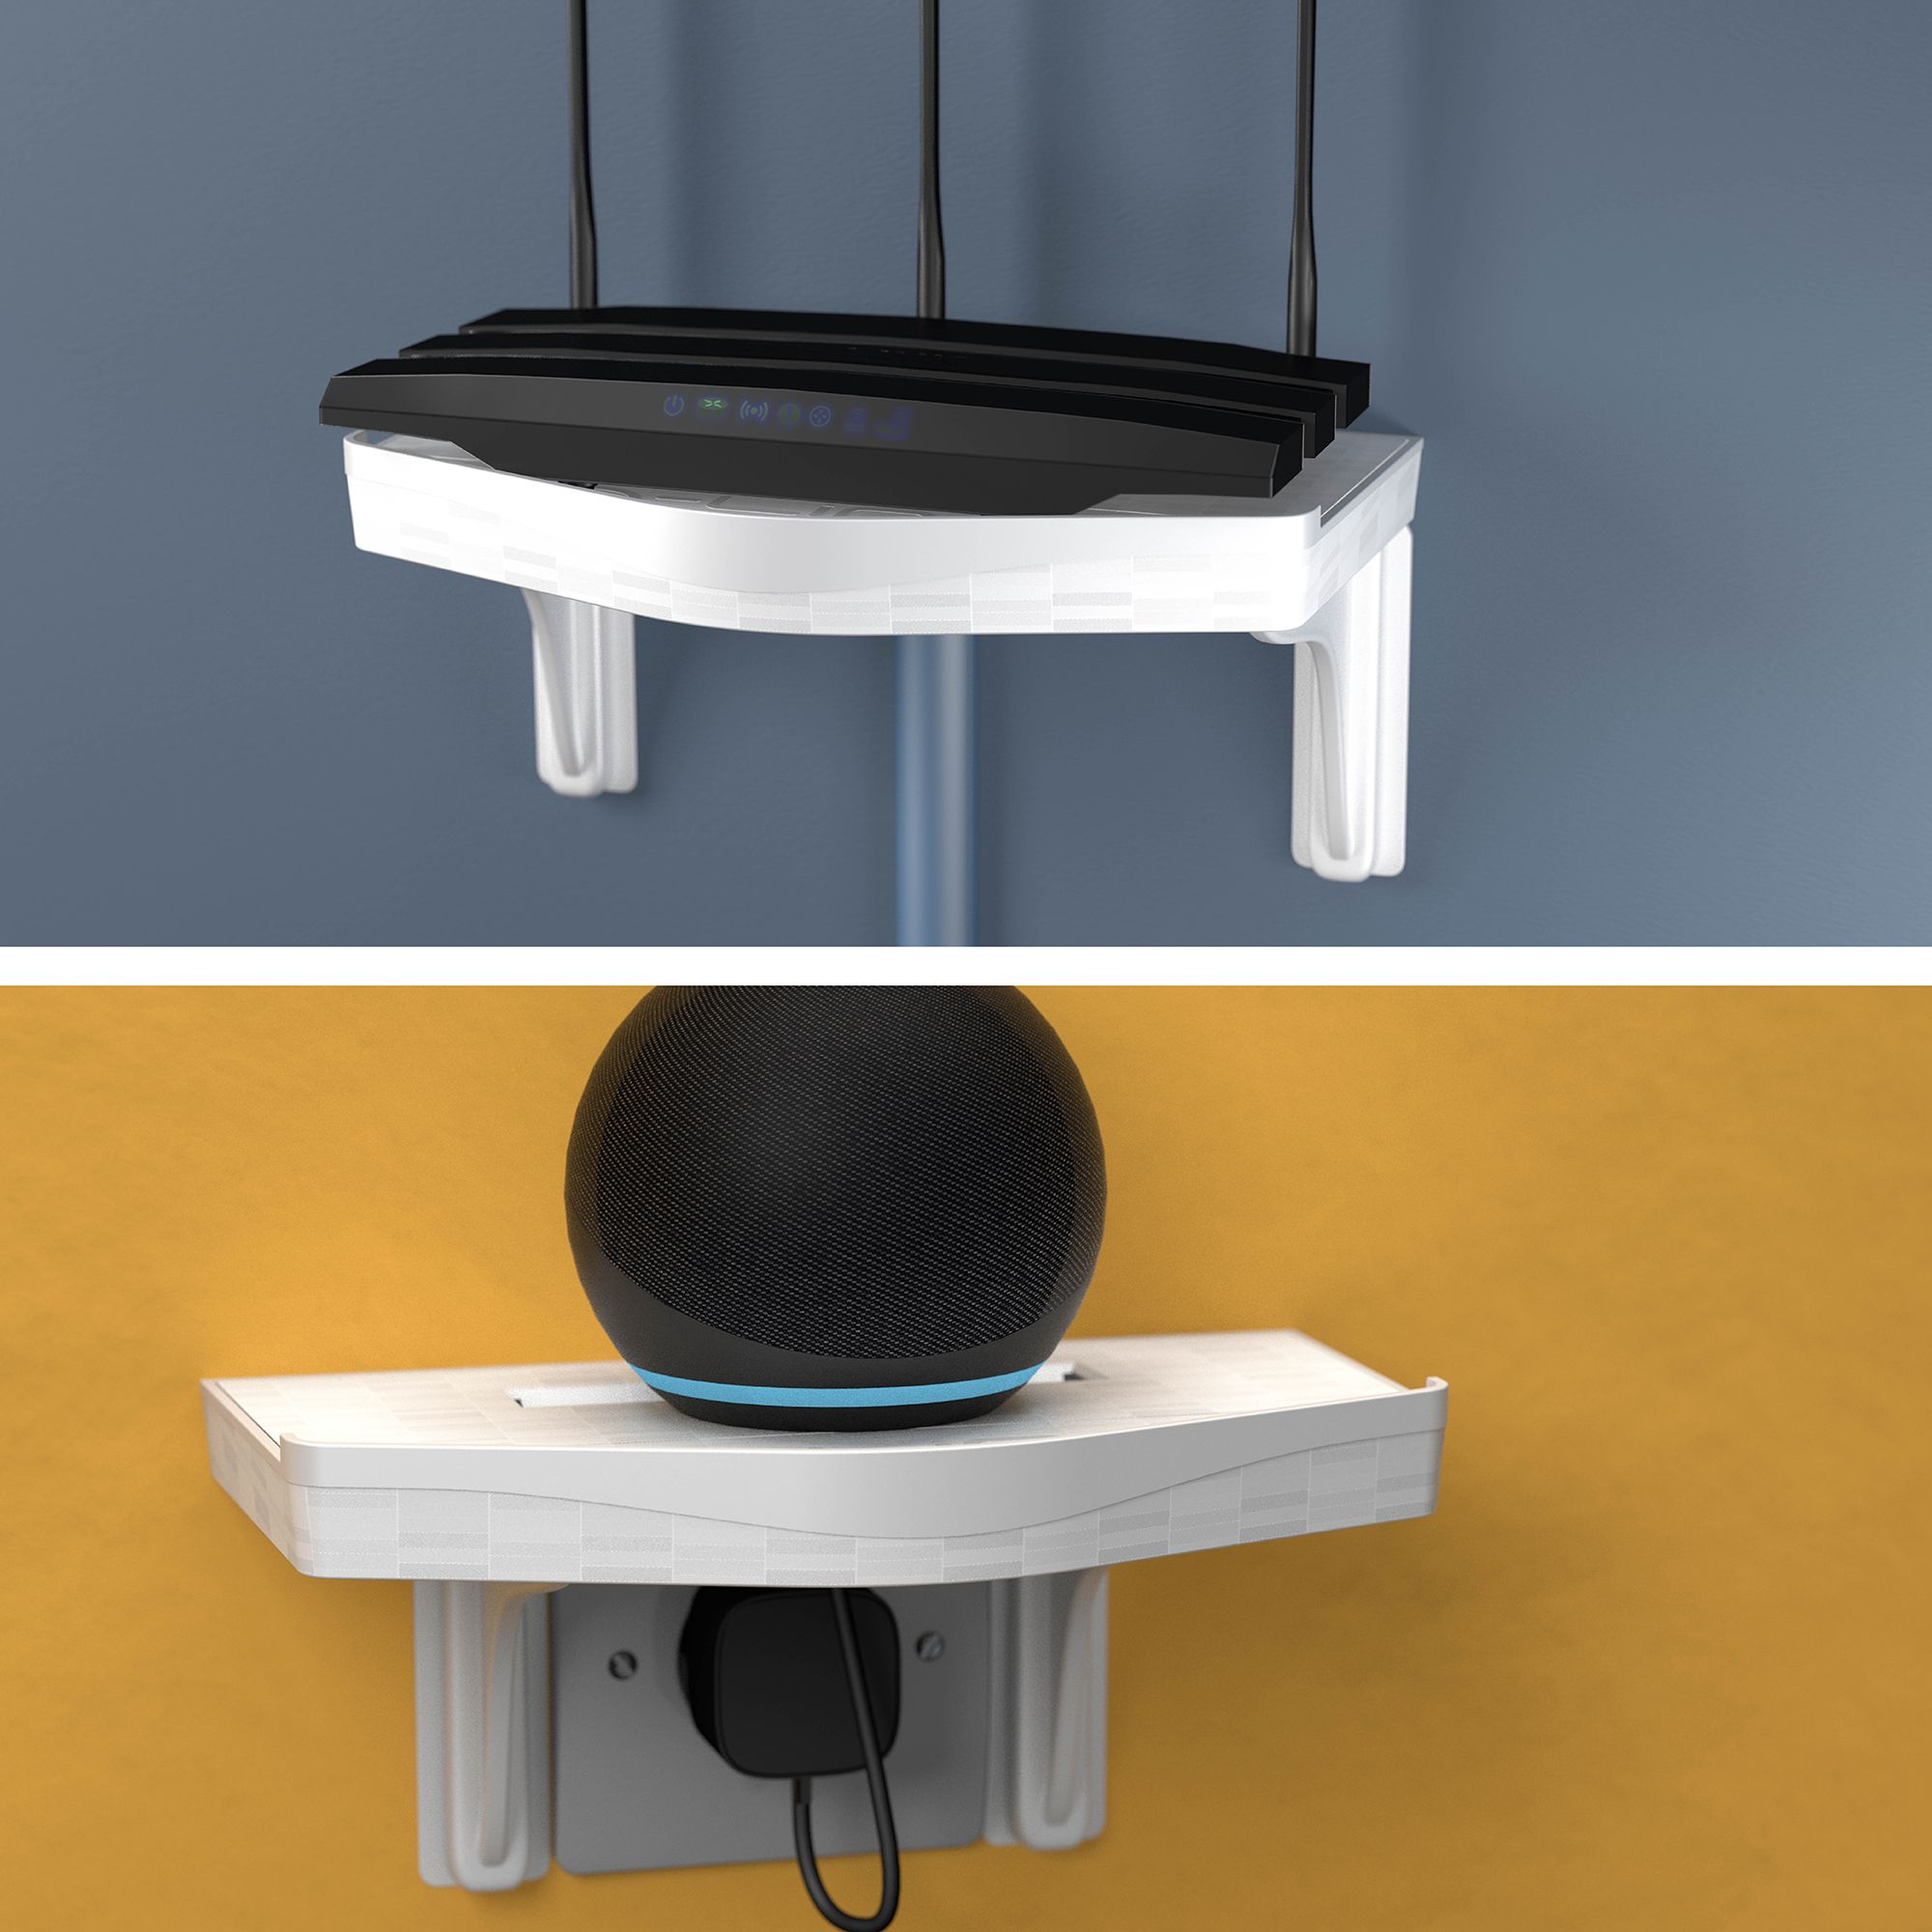 D-Line Indoor White Cable tidy shelf